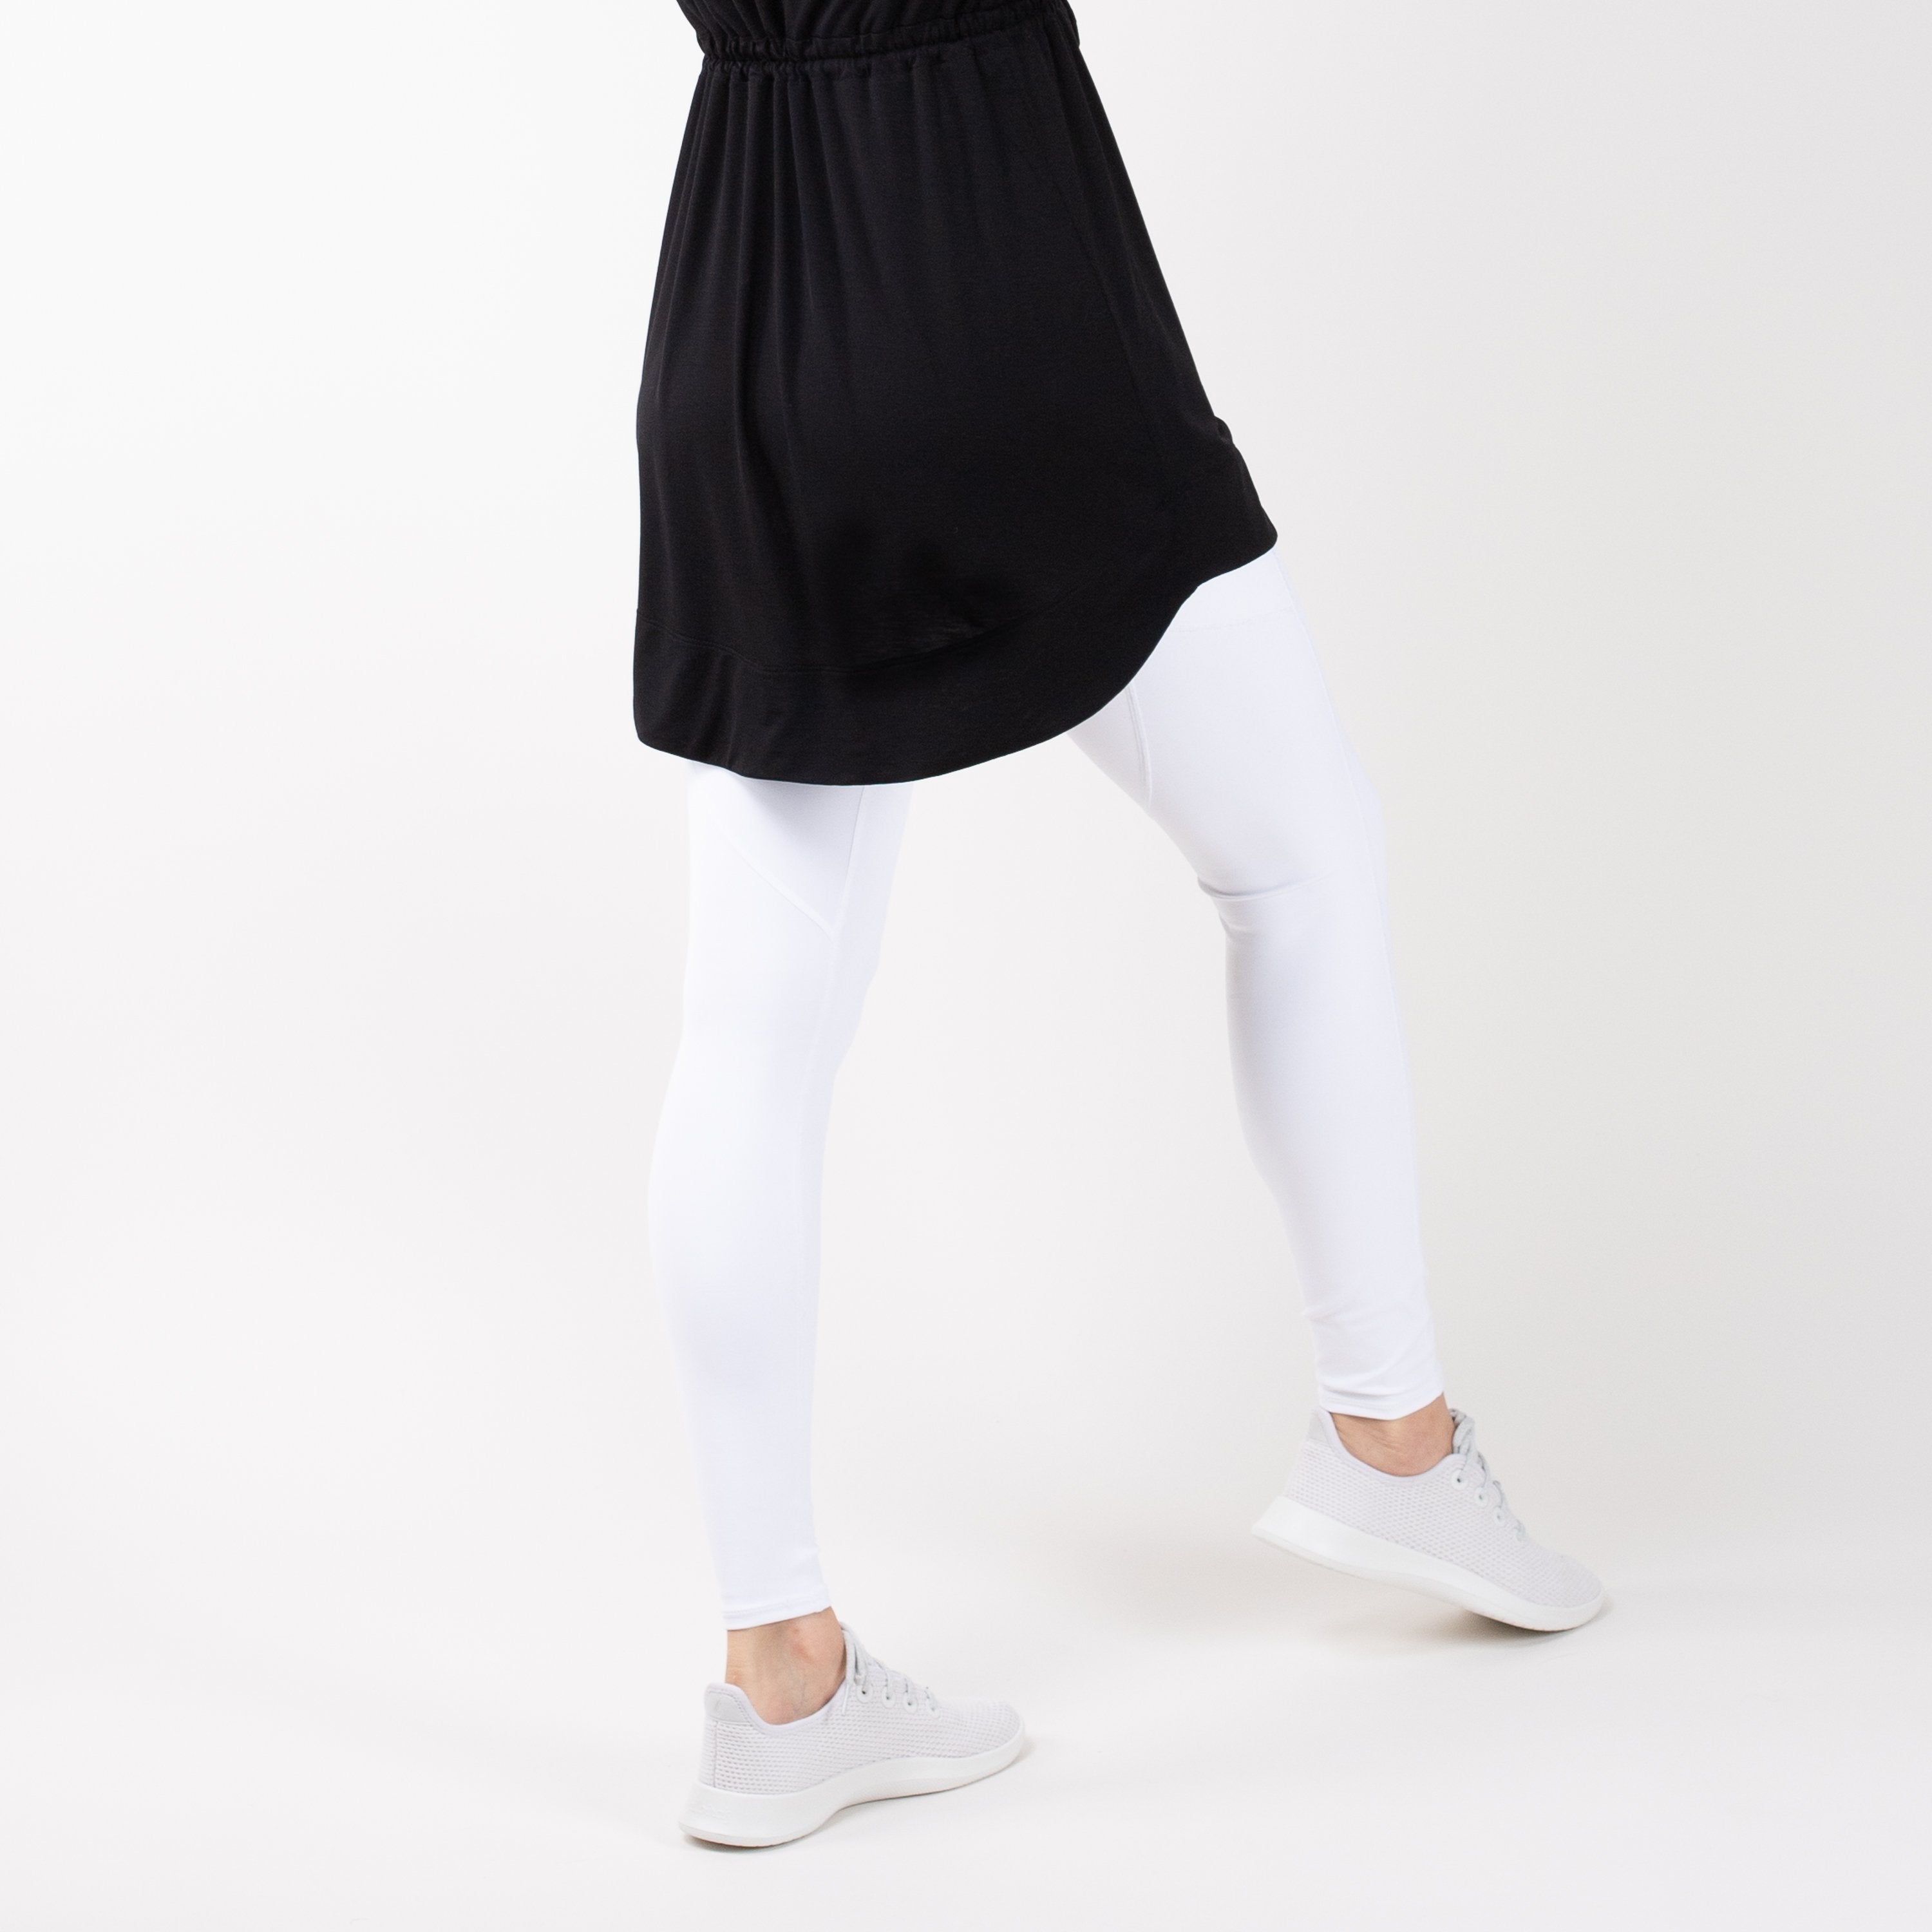 Detail shot of lower-half of a woman in modest, black HAWA drawstring tee shirt and white leggings in front of a white backdrop.